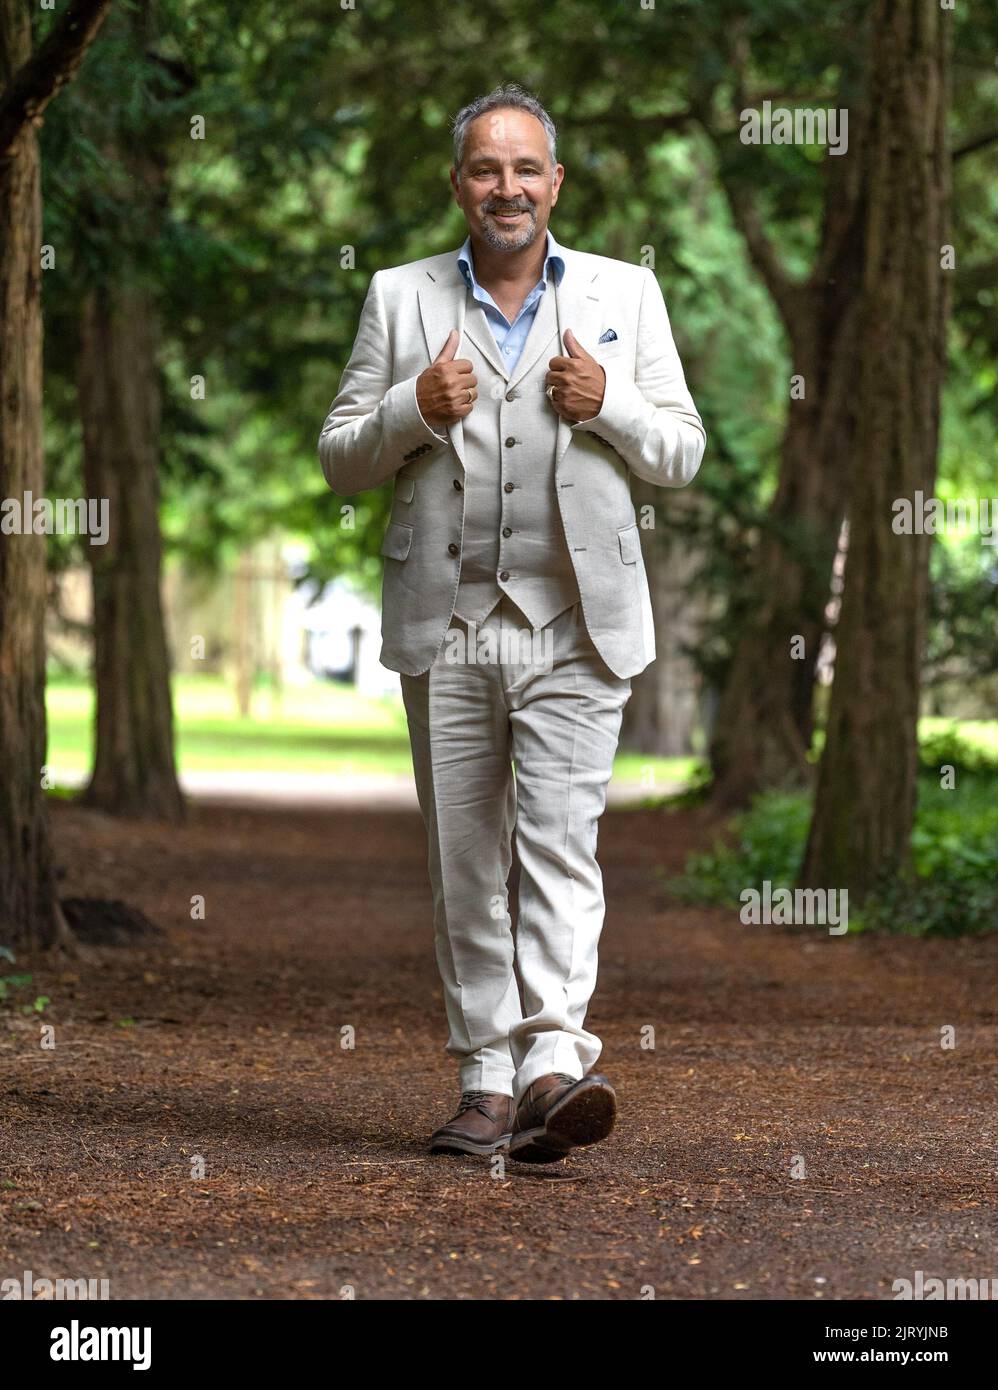 Middle-aged man walking through park in suit, Karlsruhe, Germany Stock Photo